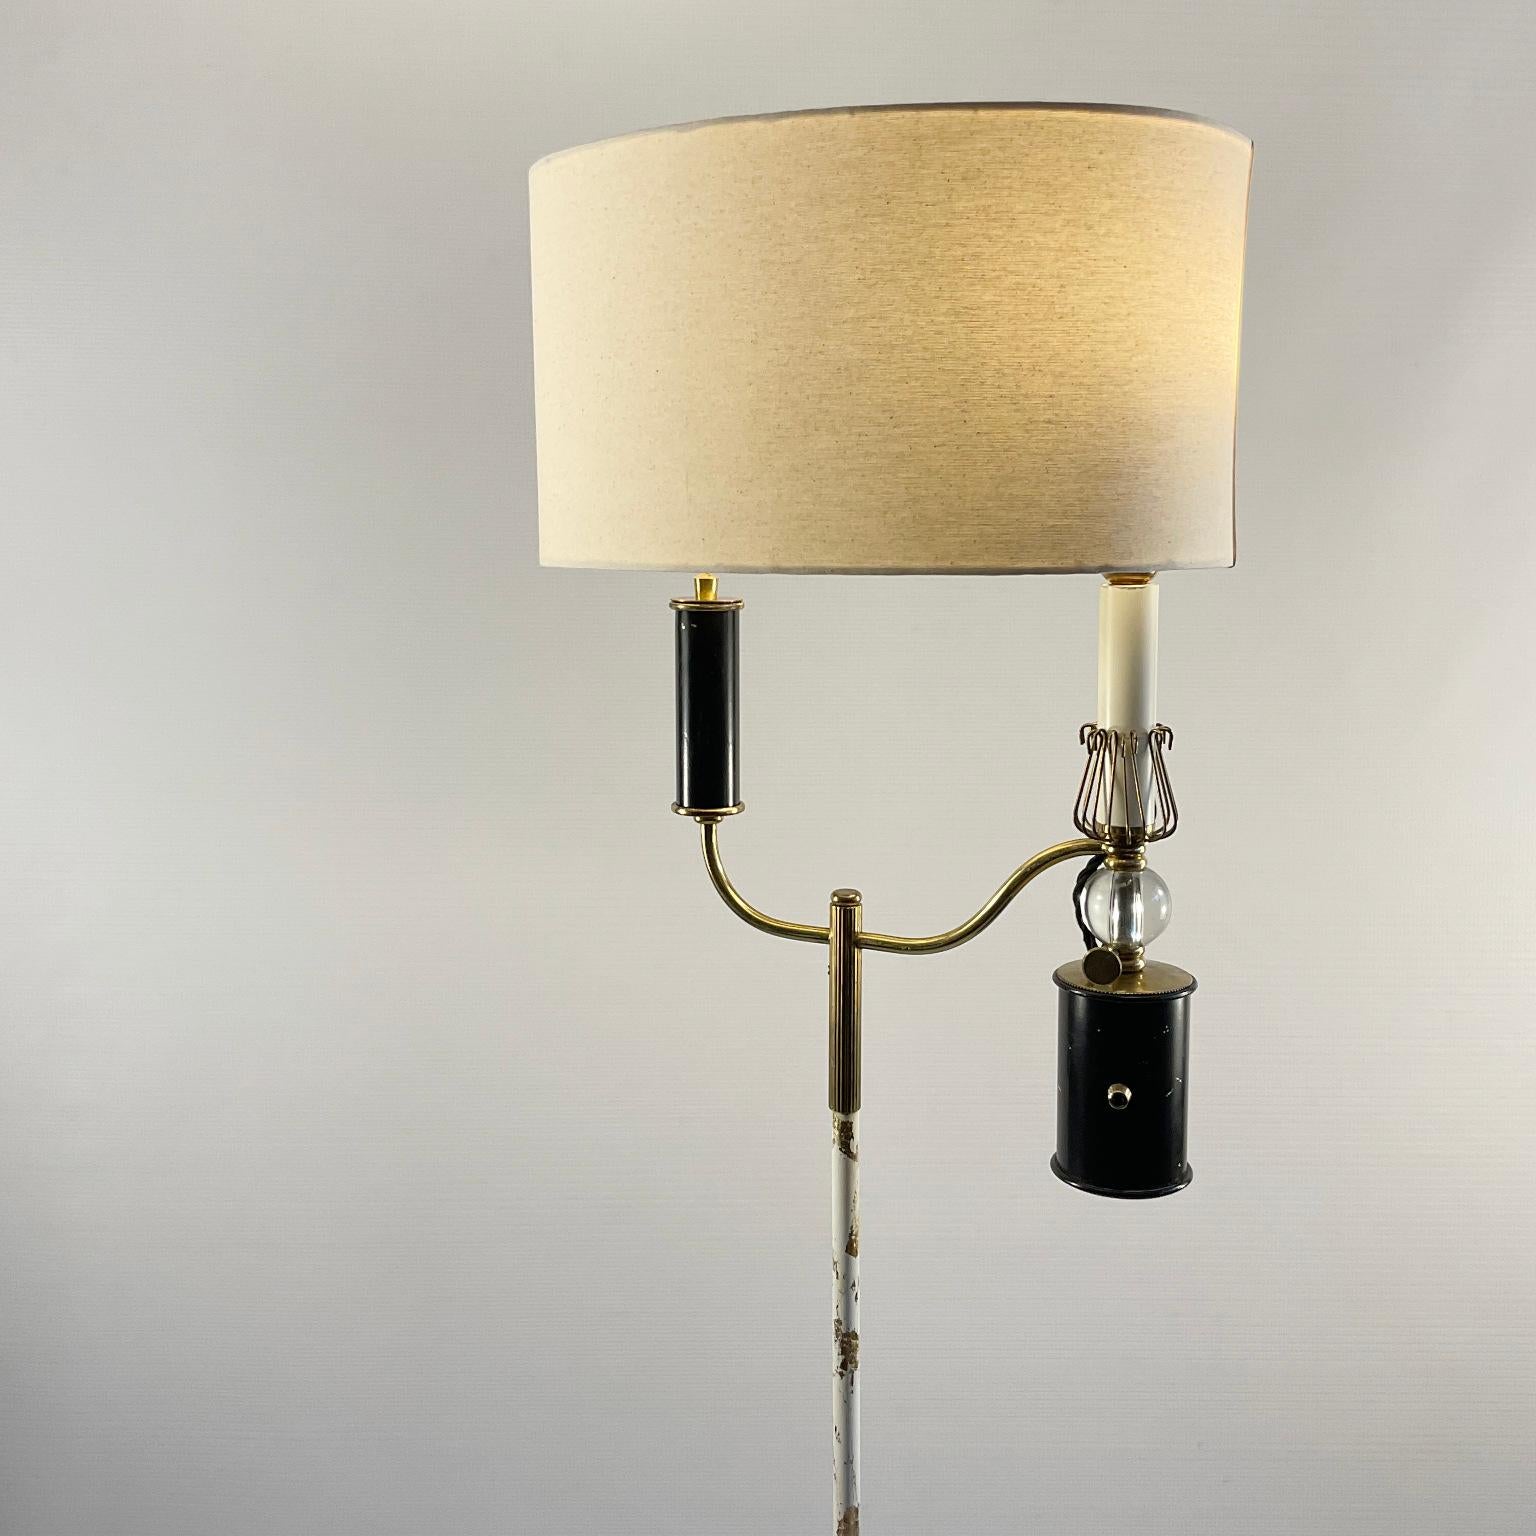 The design of this 1950s floor lamp manufactured by Maison Lunel is inspired by the Argand oil lamp invented in the 18th century by Aimé Argand and later popularized in France by a pharmacist named Antoine Quinquet who made modifications for more